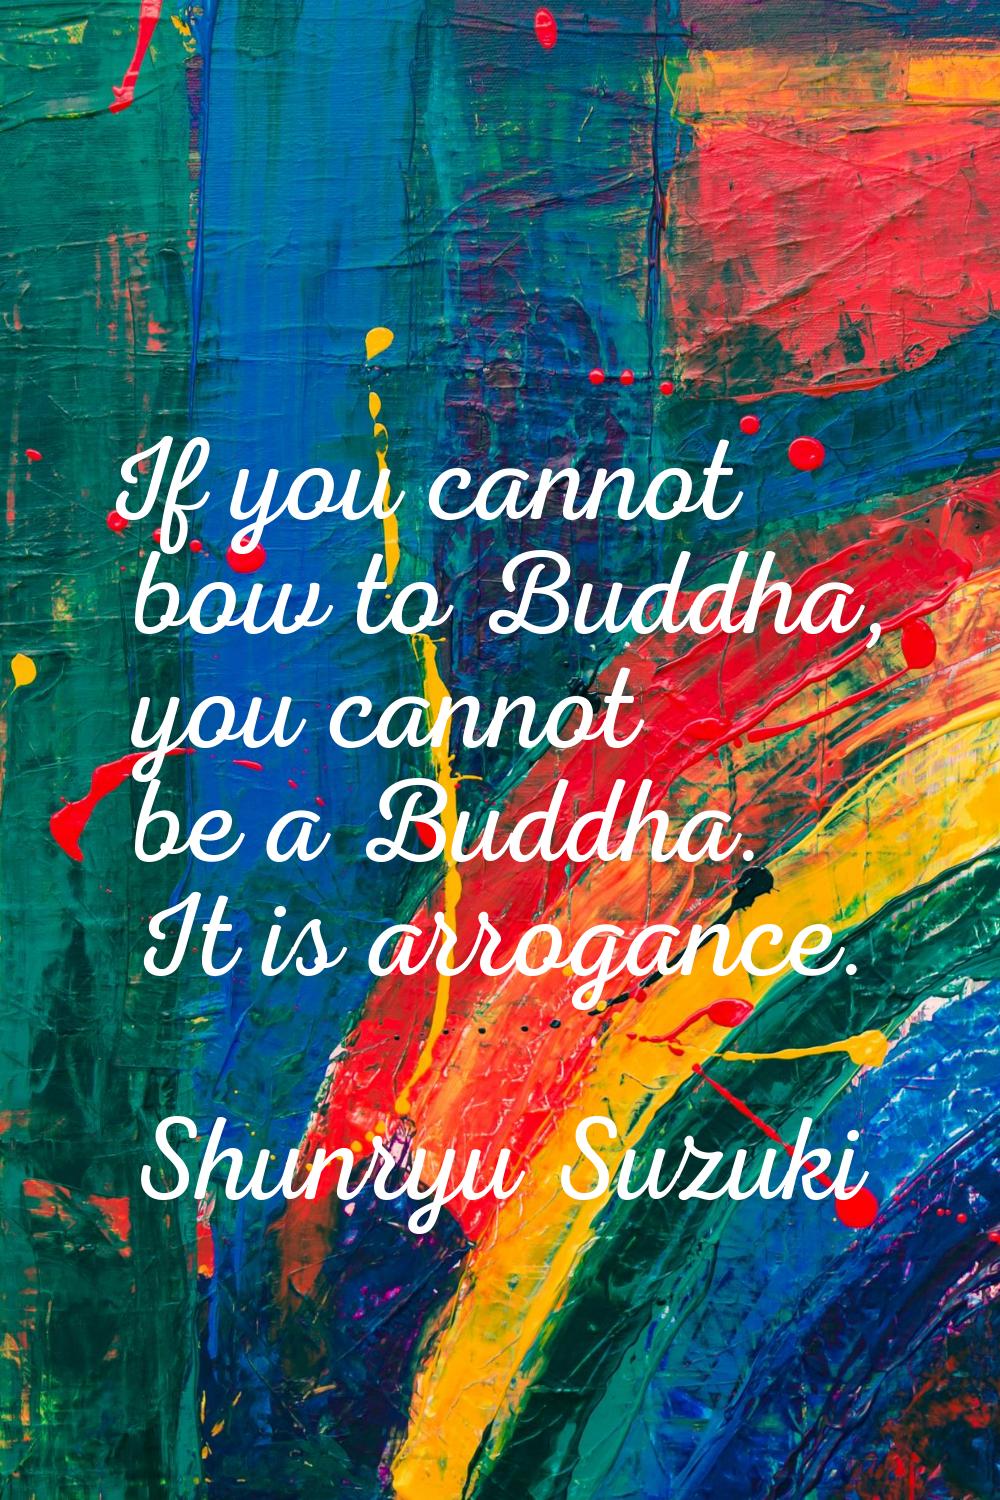 If you cannot bow to Buddha, you cannot be a Buddha. It is arrogance.